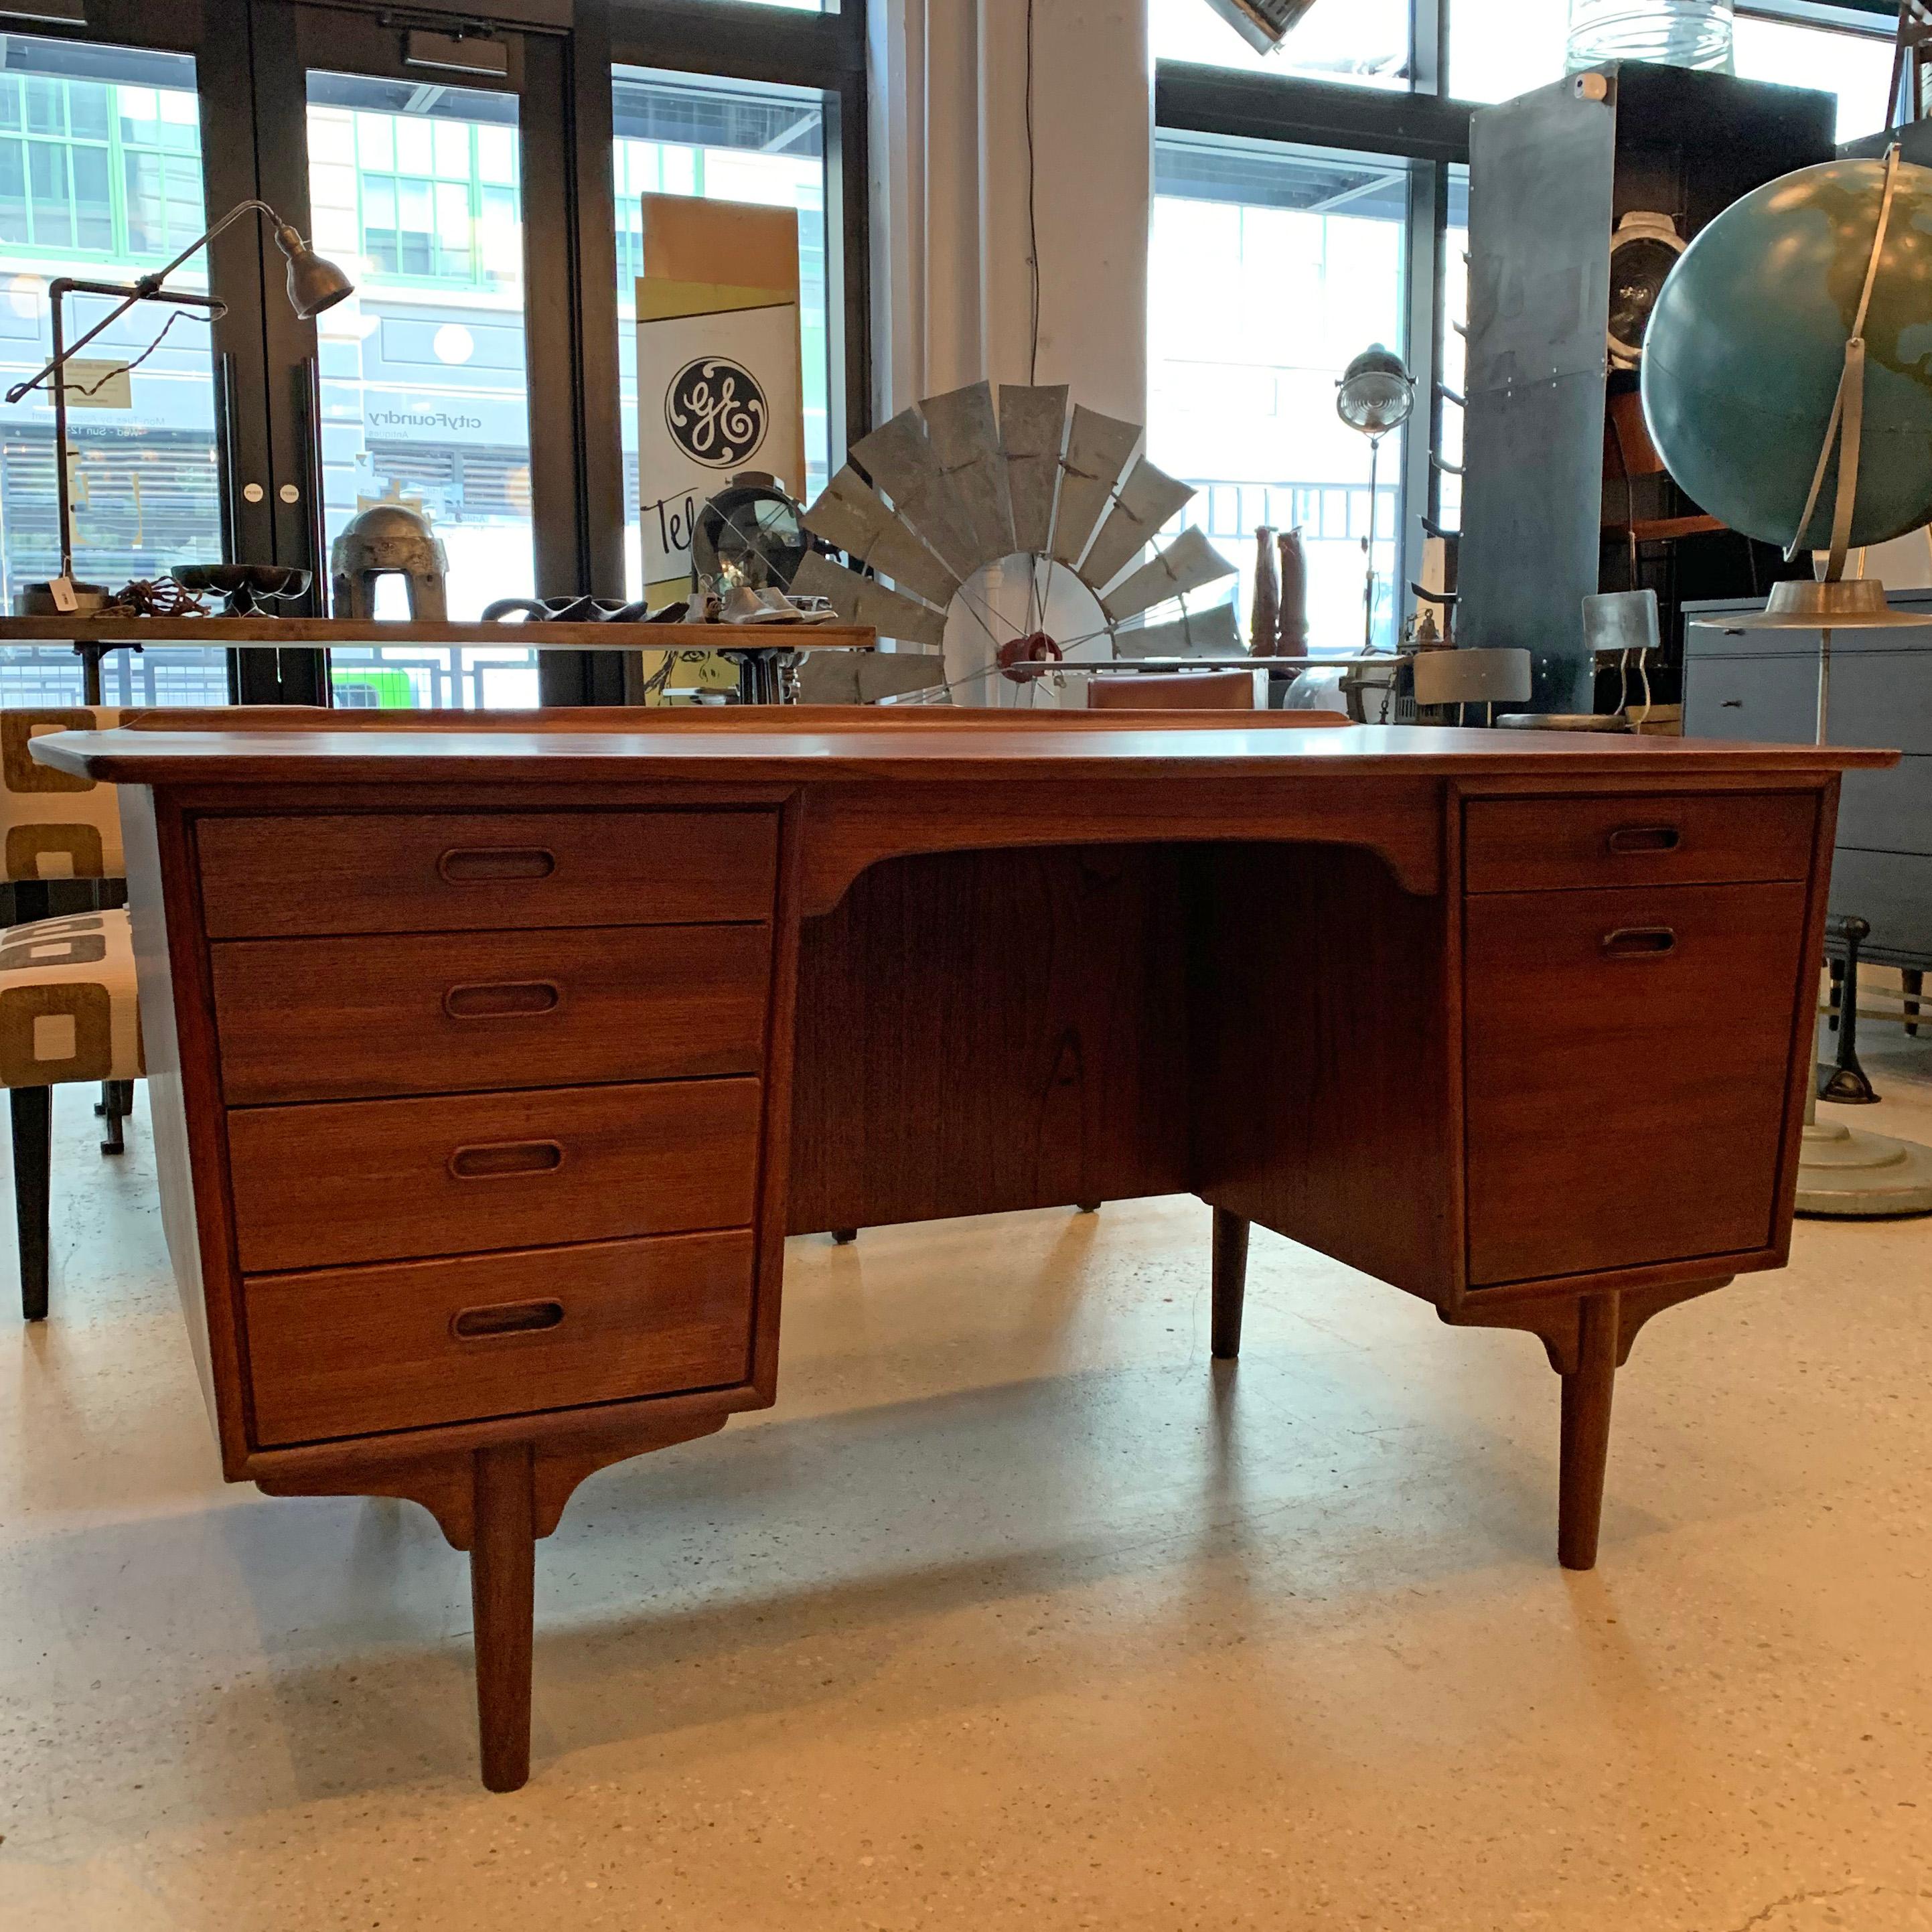 Danish modern, double pedestal, teak, executive desk by Svend A. Madsen for Sigurd Hansen features wonderful detailing throughout; 6 drawers with recessed handles, a finished bookshelf front and contrasting grain top with back lip and peaked sides.